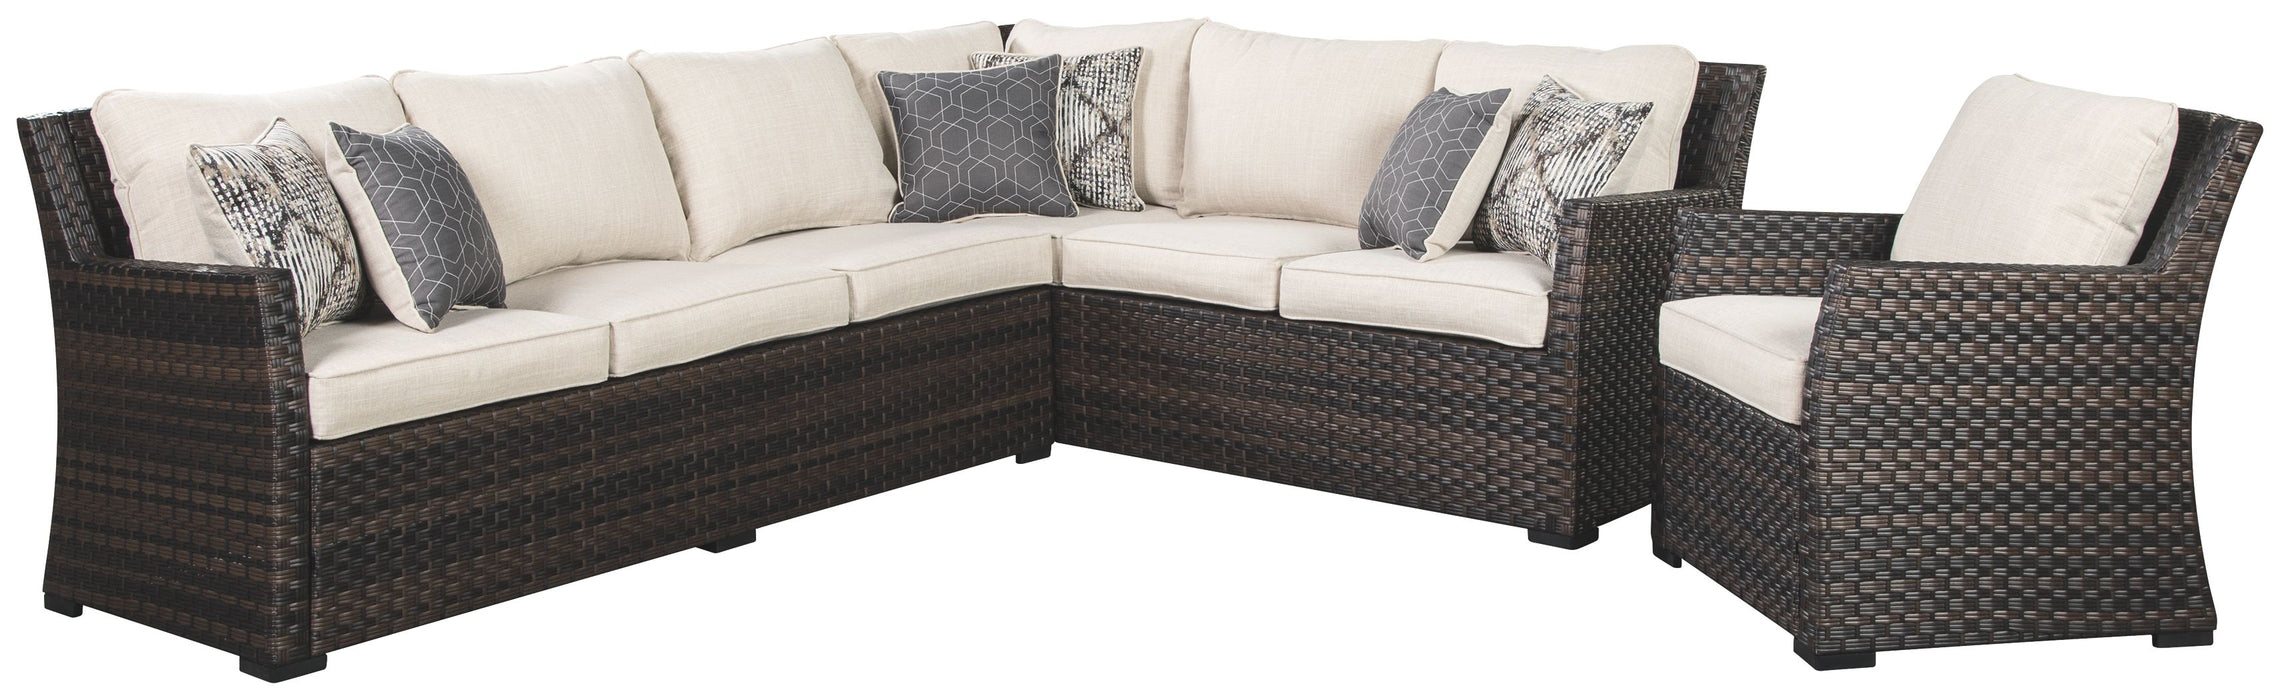 Easy Isle - Dark Brown / Beige - Sofa Sec/chair W/Cush (Set of 3) Cleveland Home Outlet (OH) - Furniture Store in Middleburg Heights Serving Cleveland, Strongsville, and Online